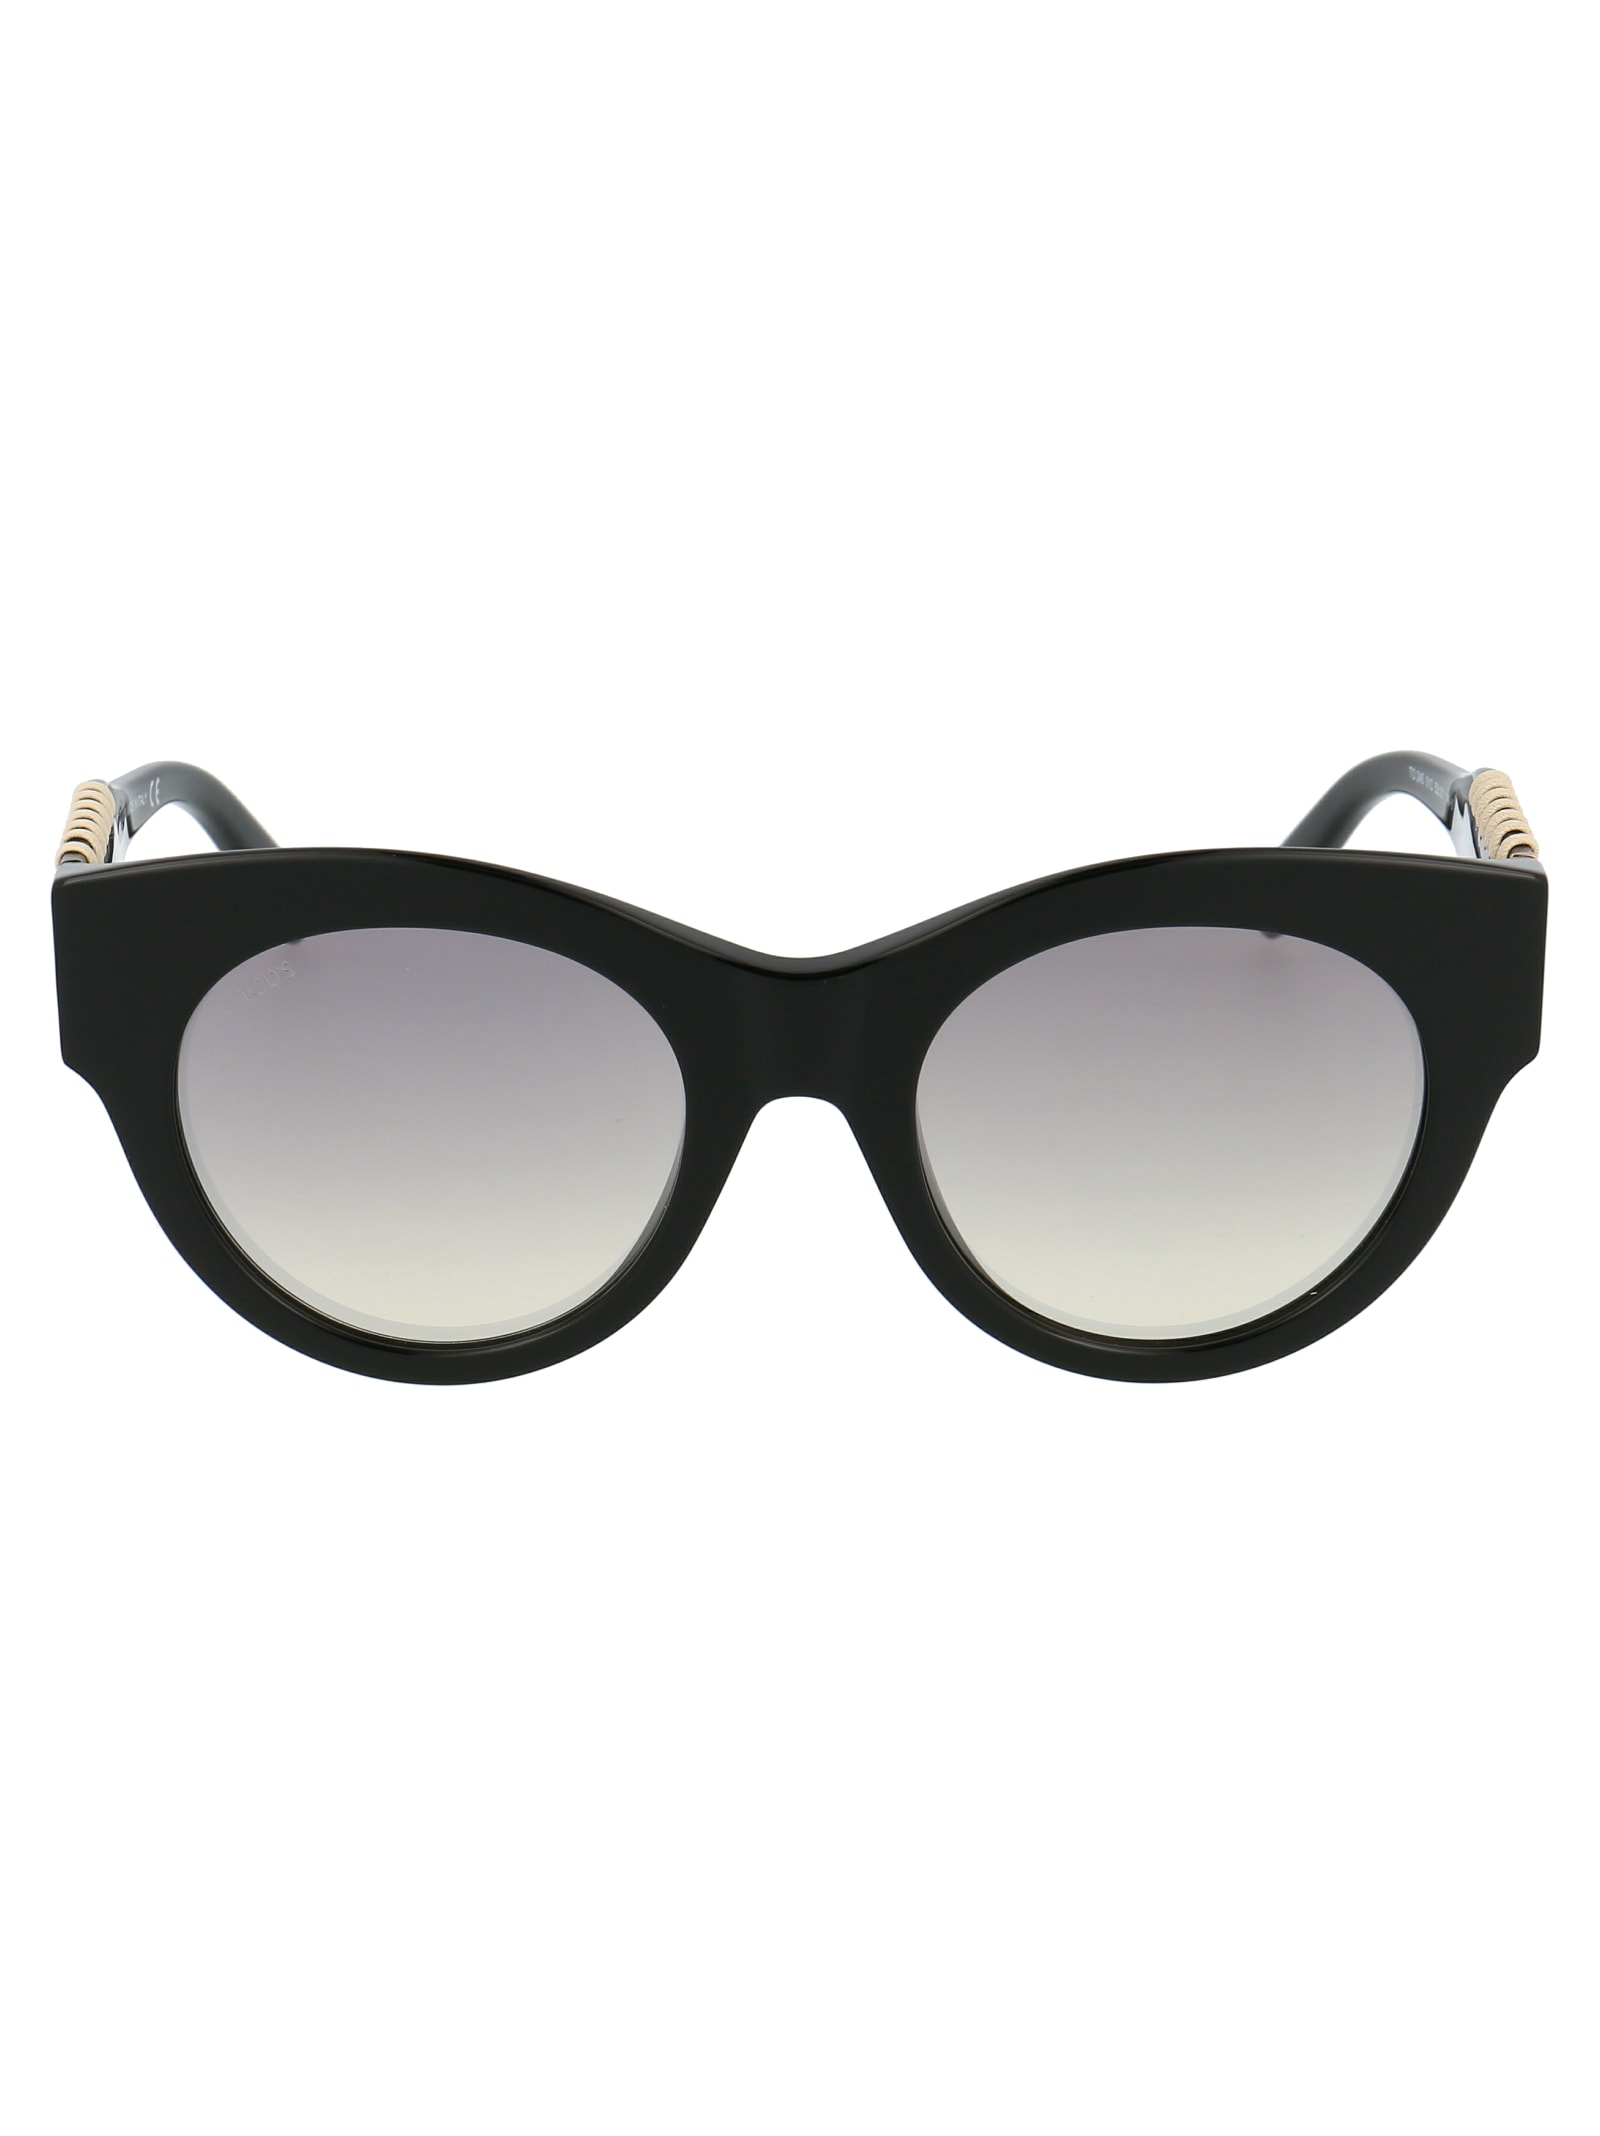 Tods To0245 Sunglasses